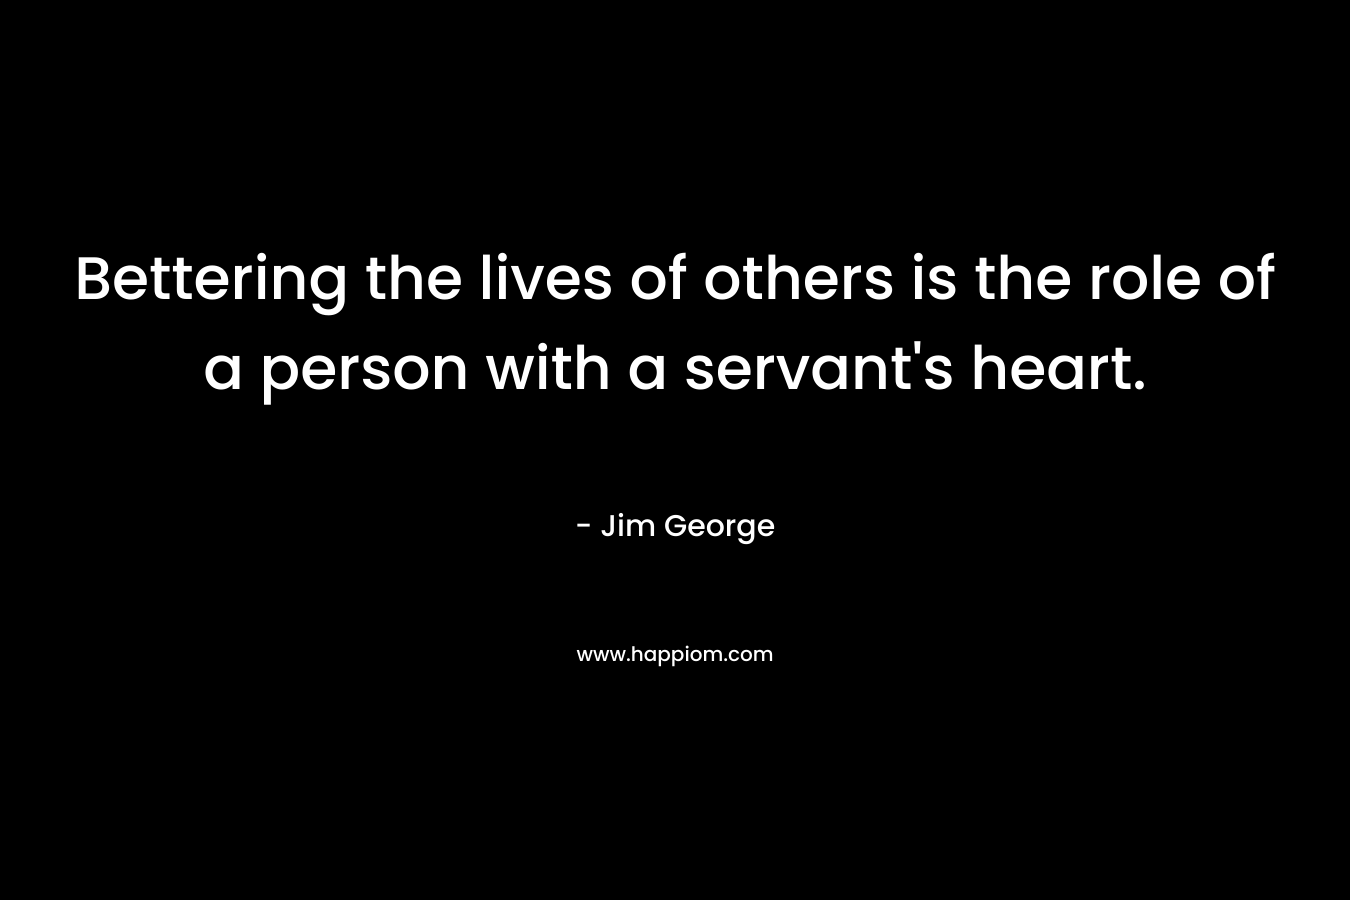 Bettering the lives of others is the role of a person with a servant’s heart. – Jim George